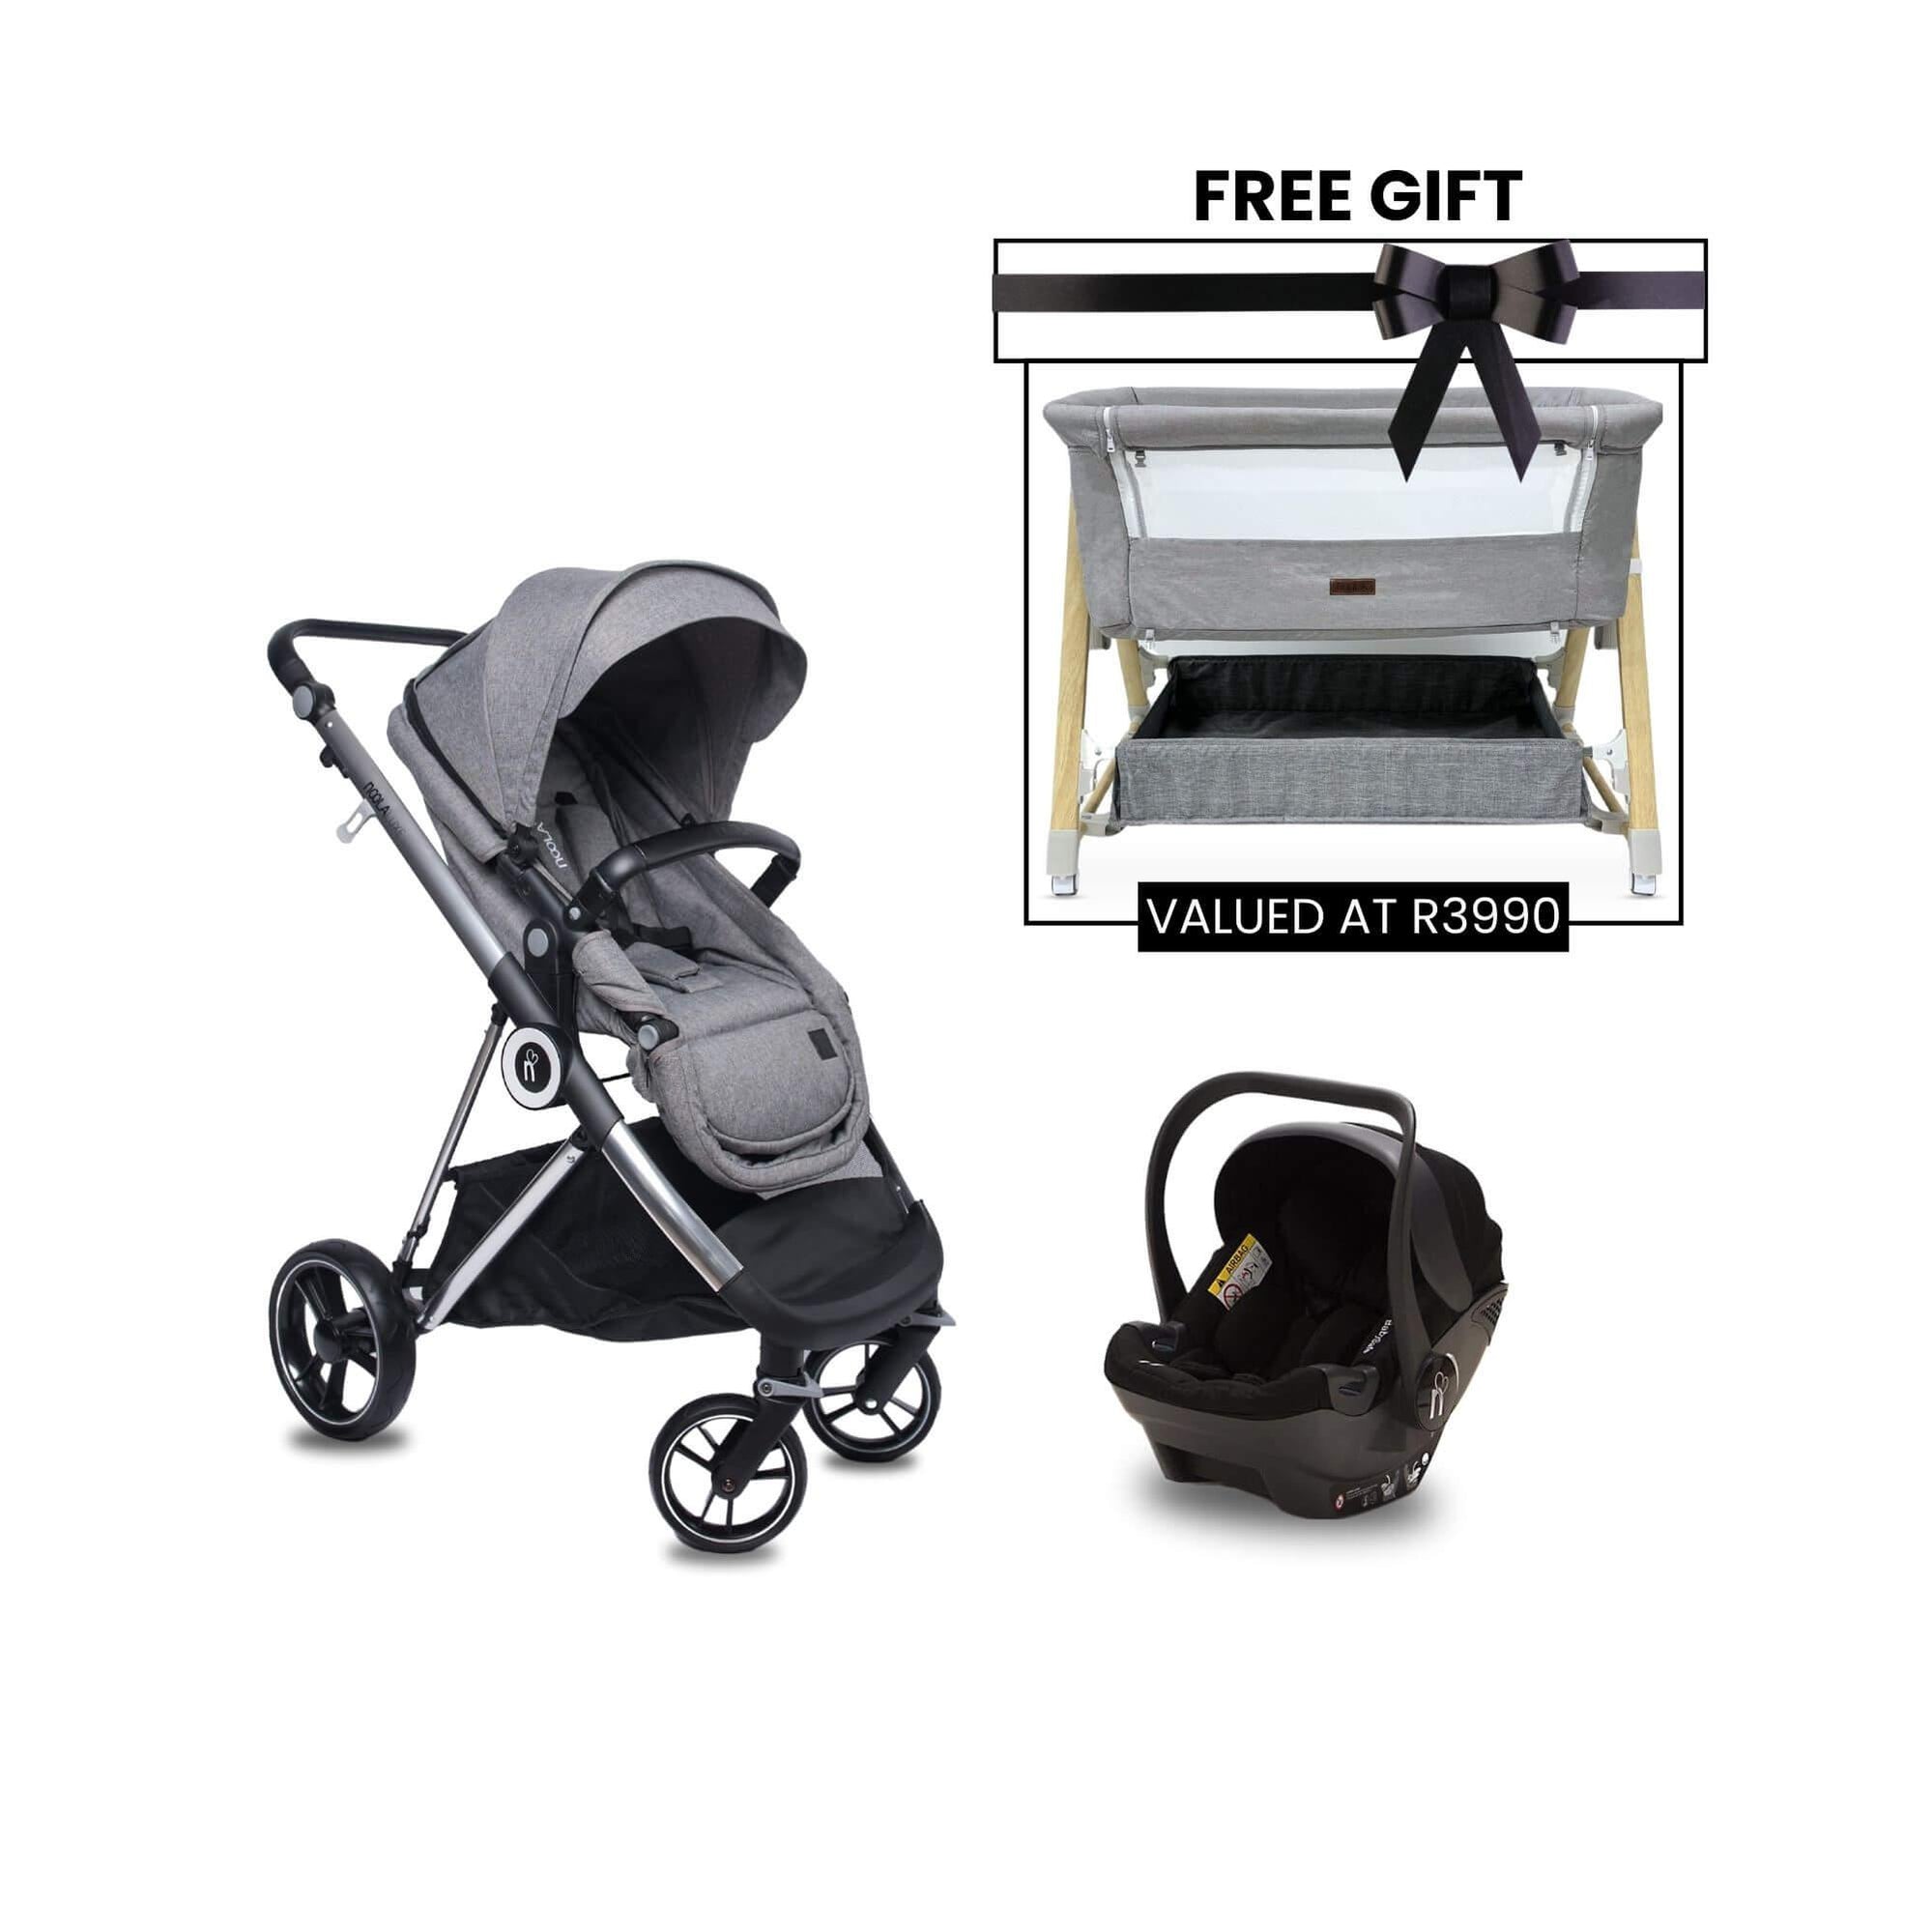 The Luxe 3in1 Travel System Lunar Grey + Free Co-Sleeper Bassinet